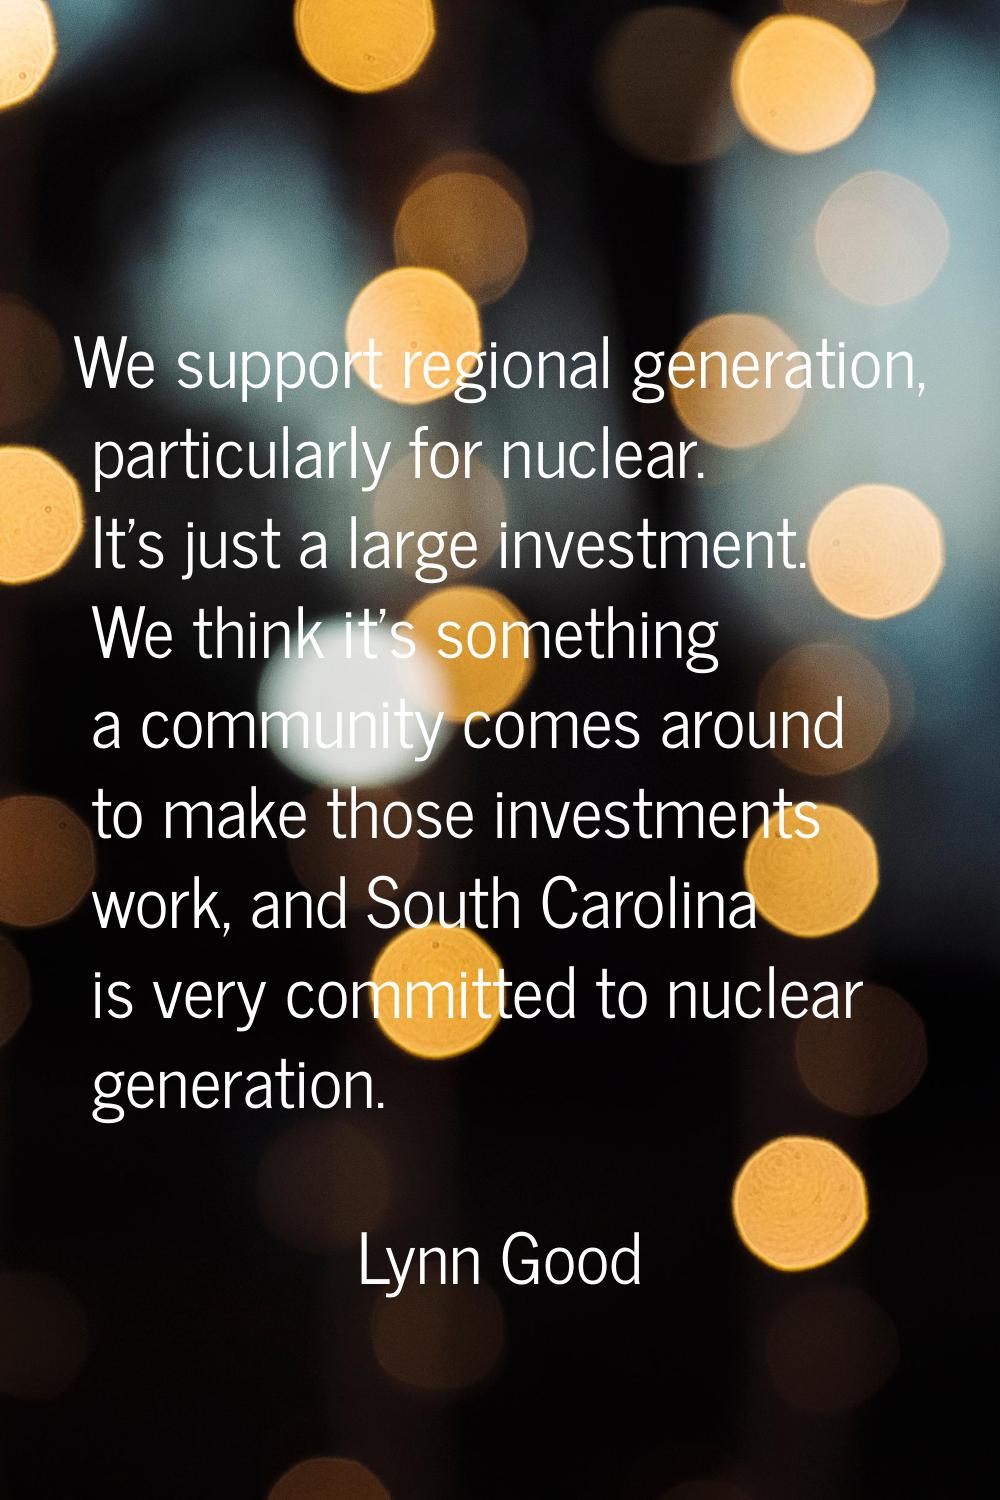 We support regional generation, particularly for nuclear. It's just a large investment. We think it